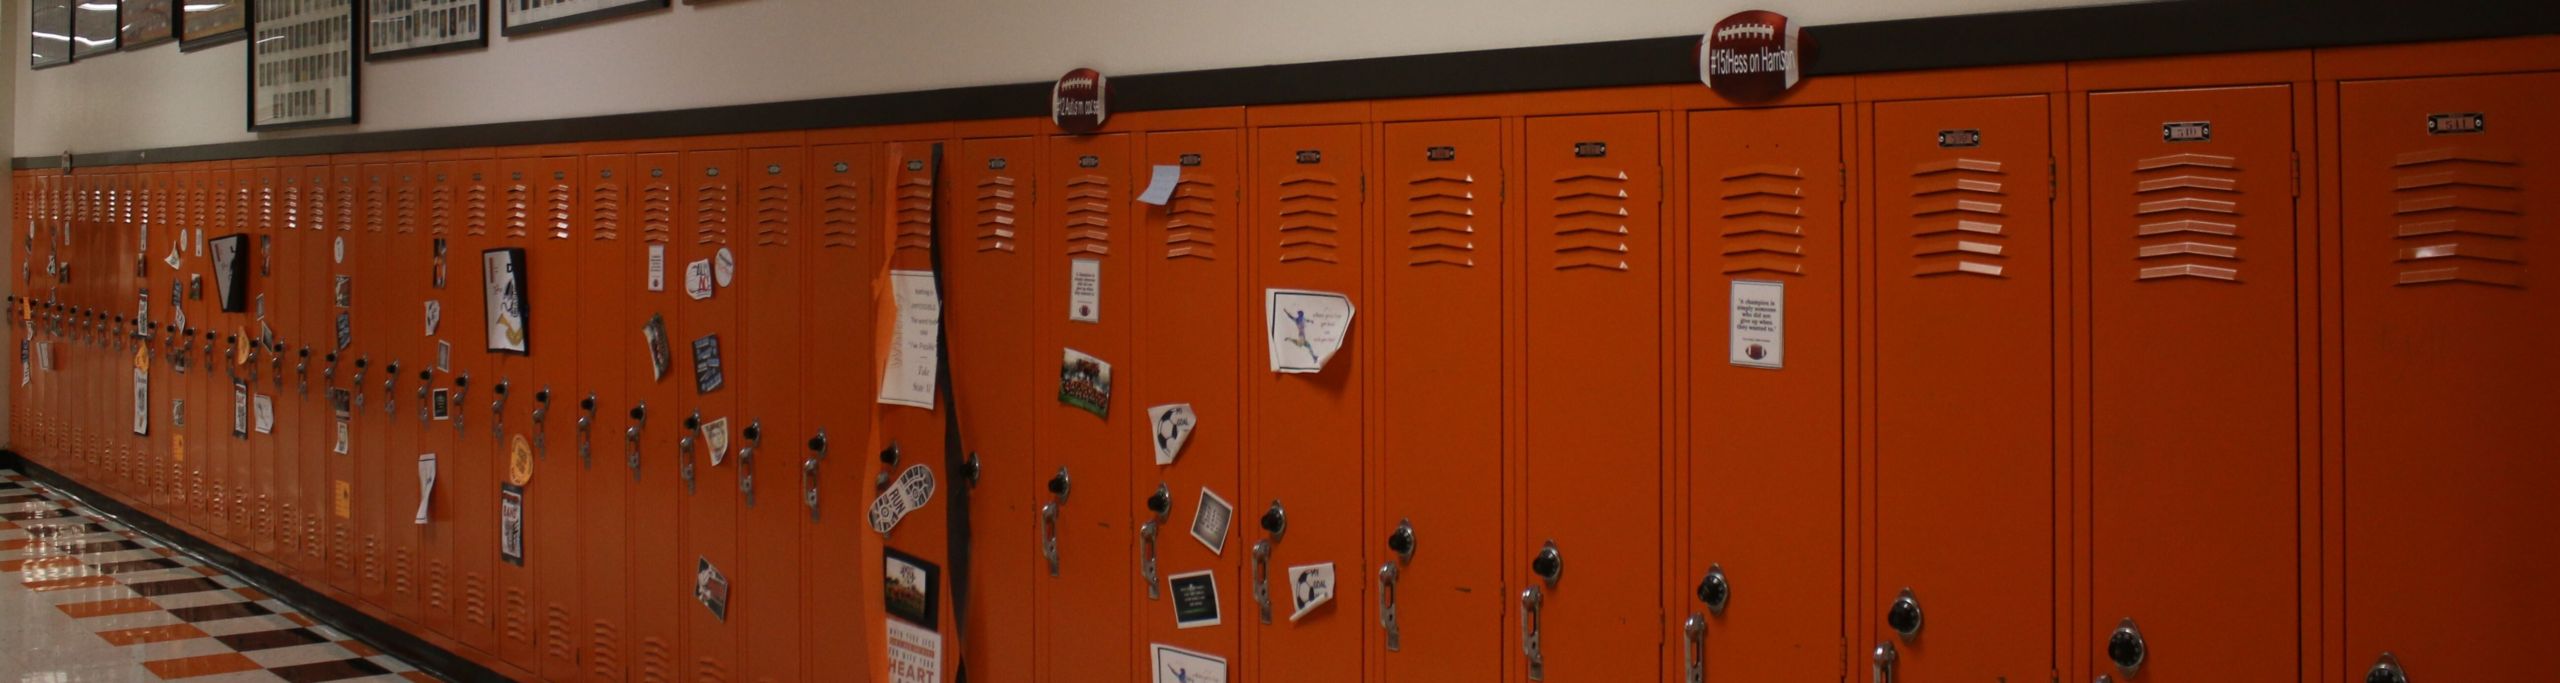 An image of a row of orange lockers with posters and flyers taped to them.